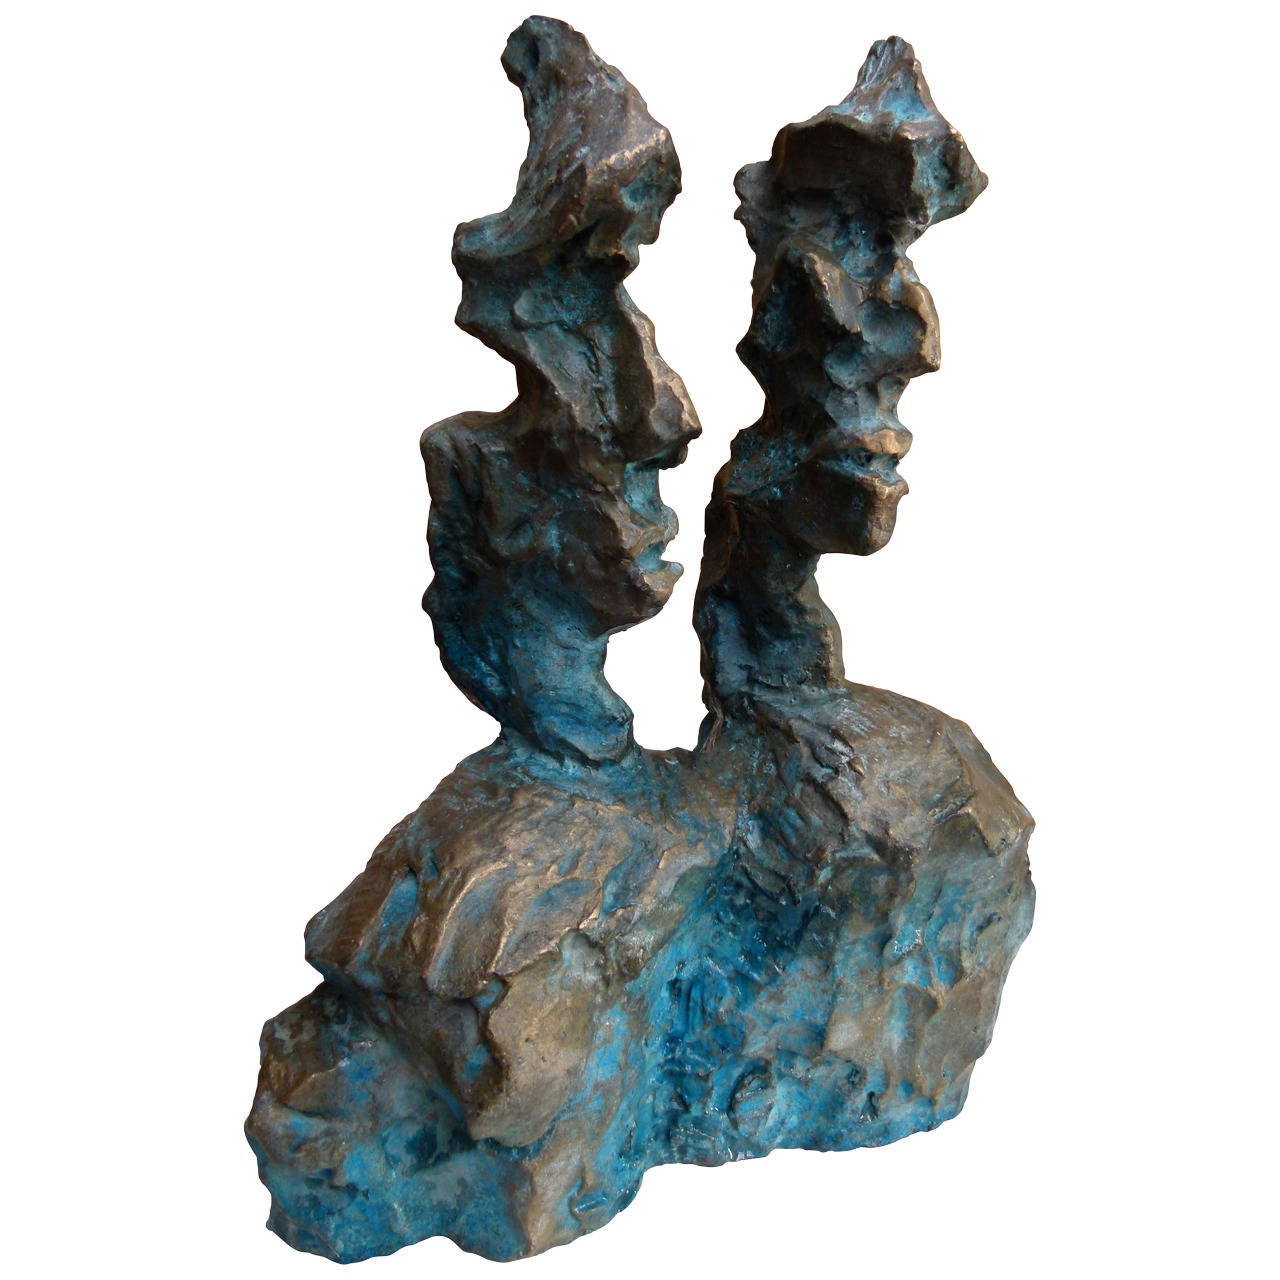 Abstract Figurative Bronze by the British Sculptor Alan John, circa 1978 For Sale